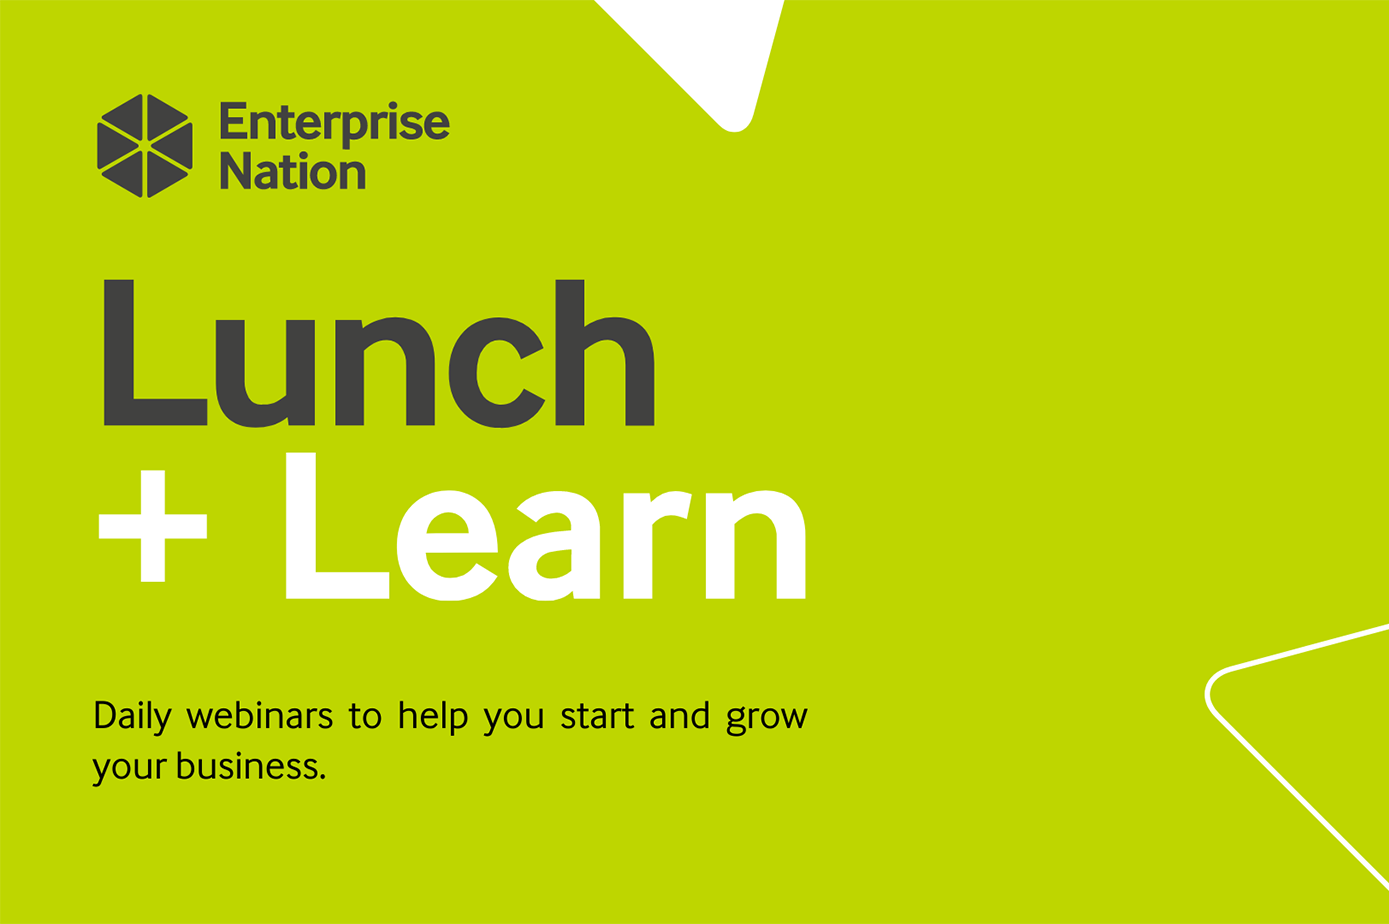 Image containing Enterprise Natio's logo and the title of the session, 'Lunch and Learn'